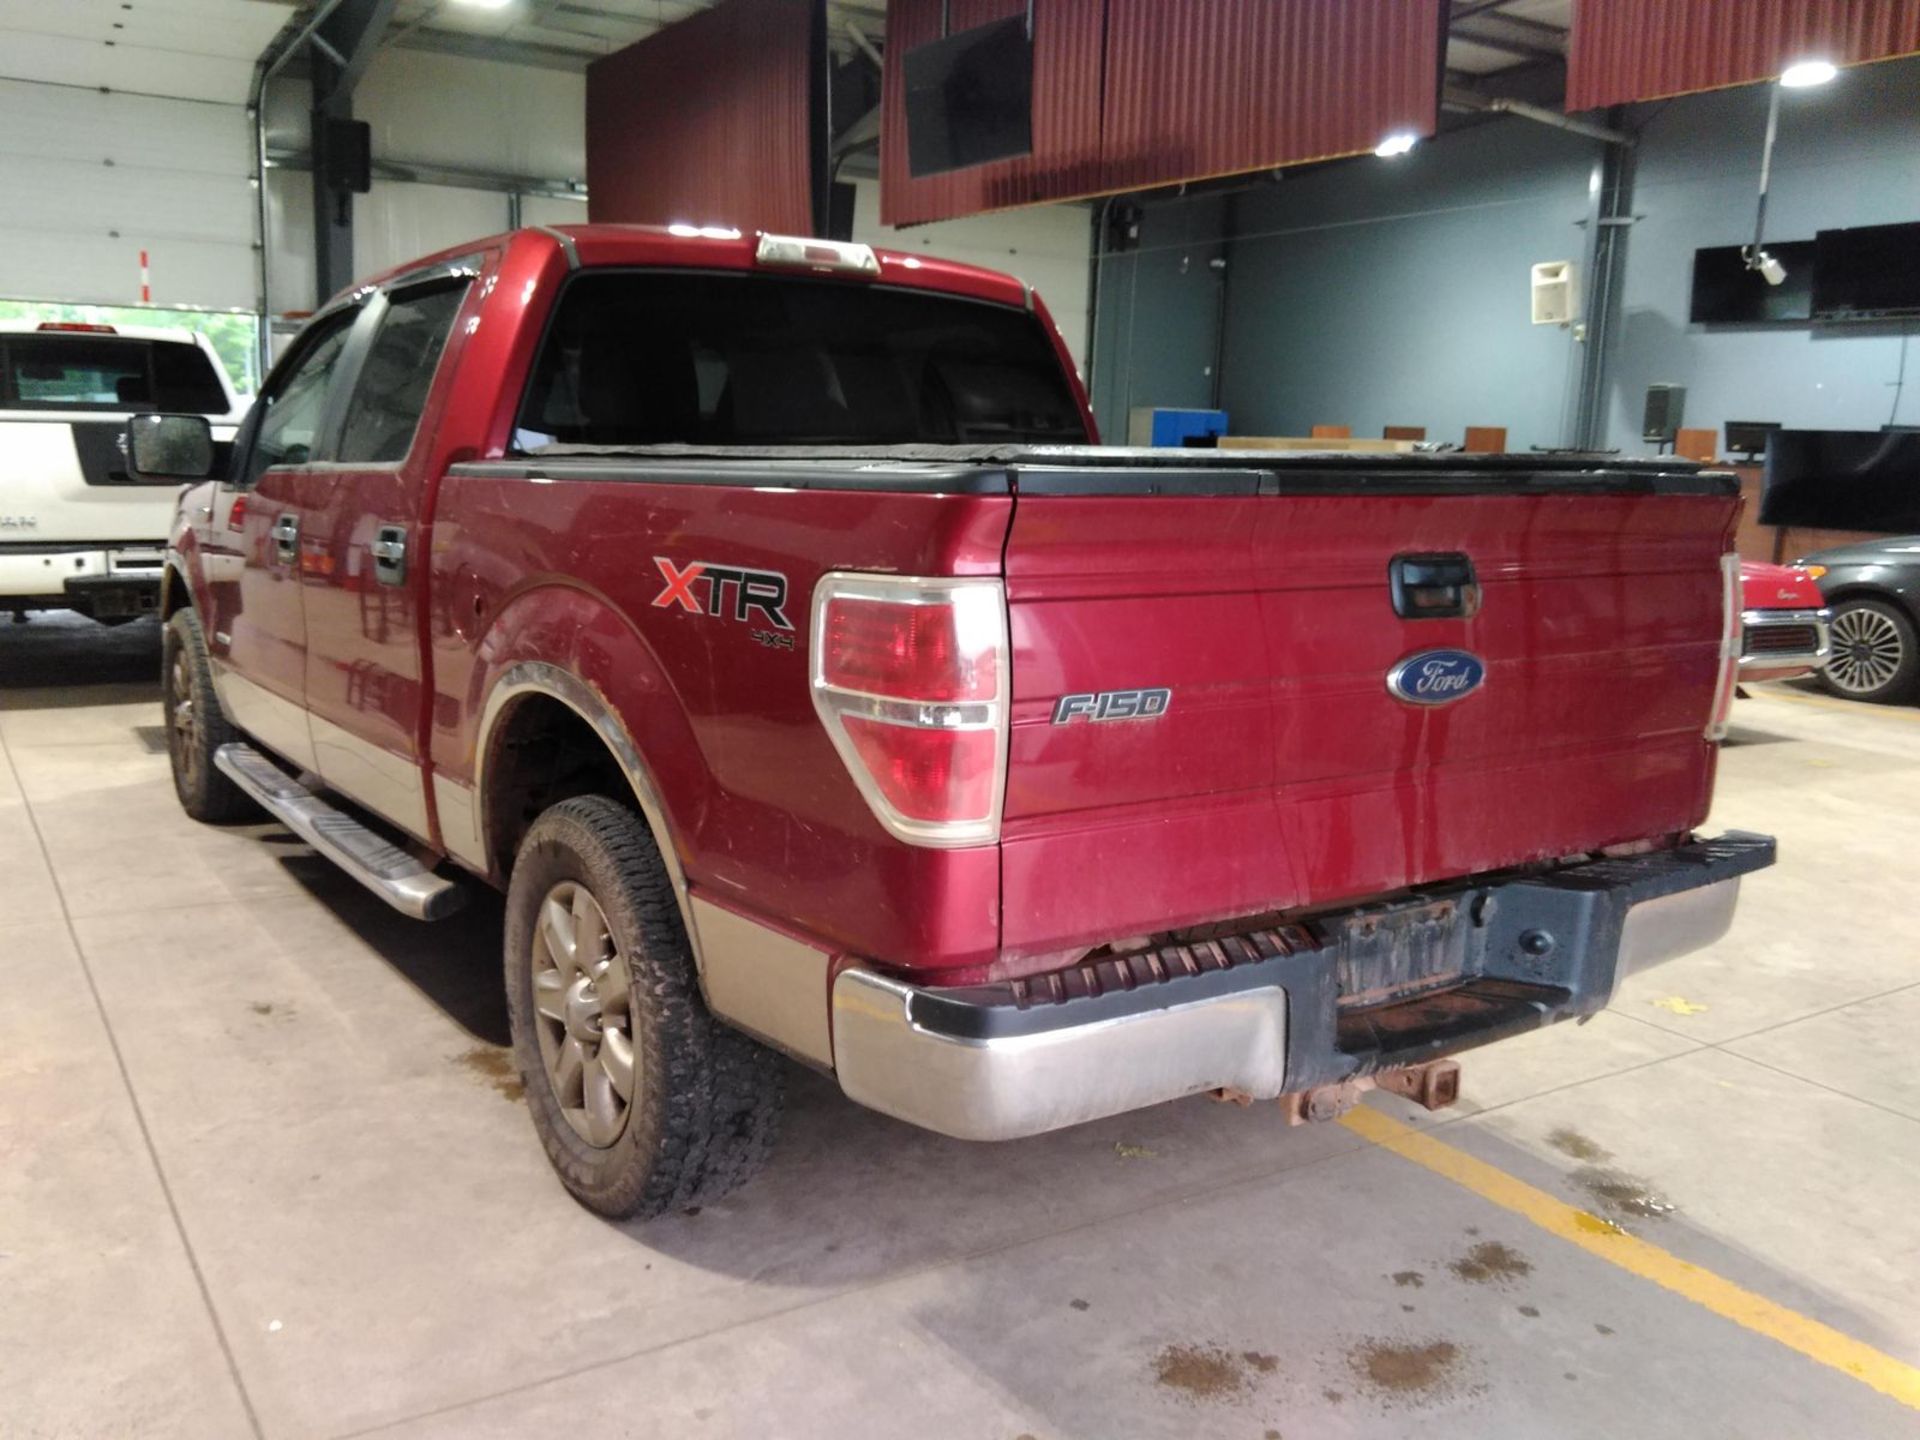 ** ON SALE ** Ford F-150 3.5L V6 XLT XTR Super Crew '2014 Year' Fresh Import - A/C - 4WD - Image 5 of 10